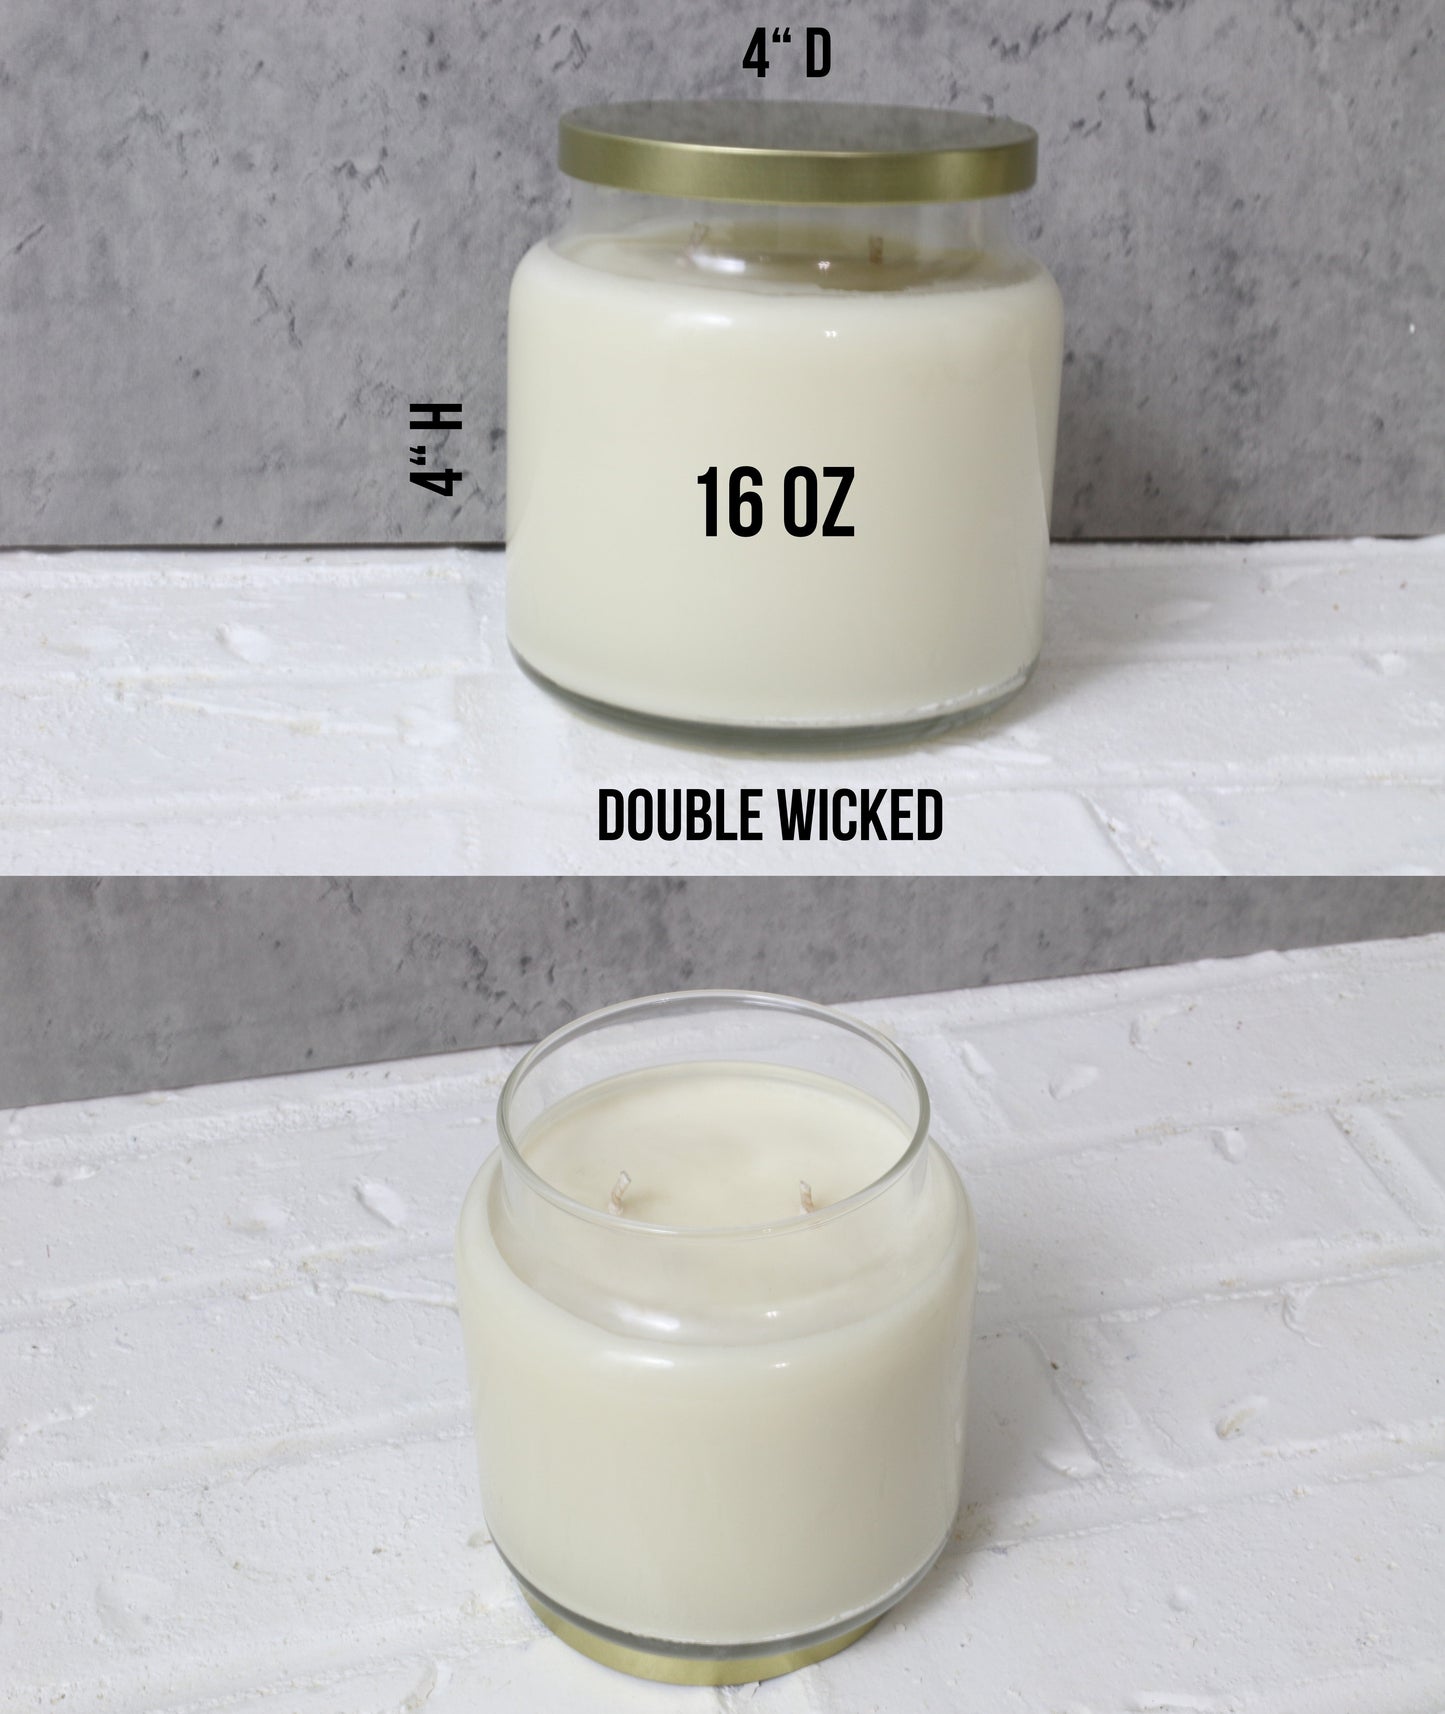 Make Sure This Candle is Lit if You Take a Shit Candle - Choose Your Scent - Funny Bathroom